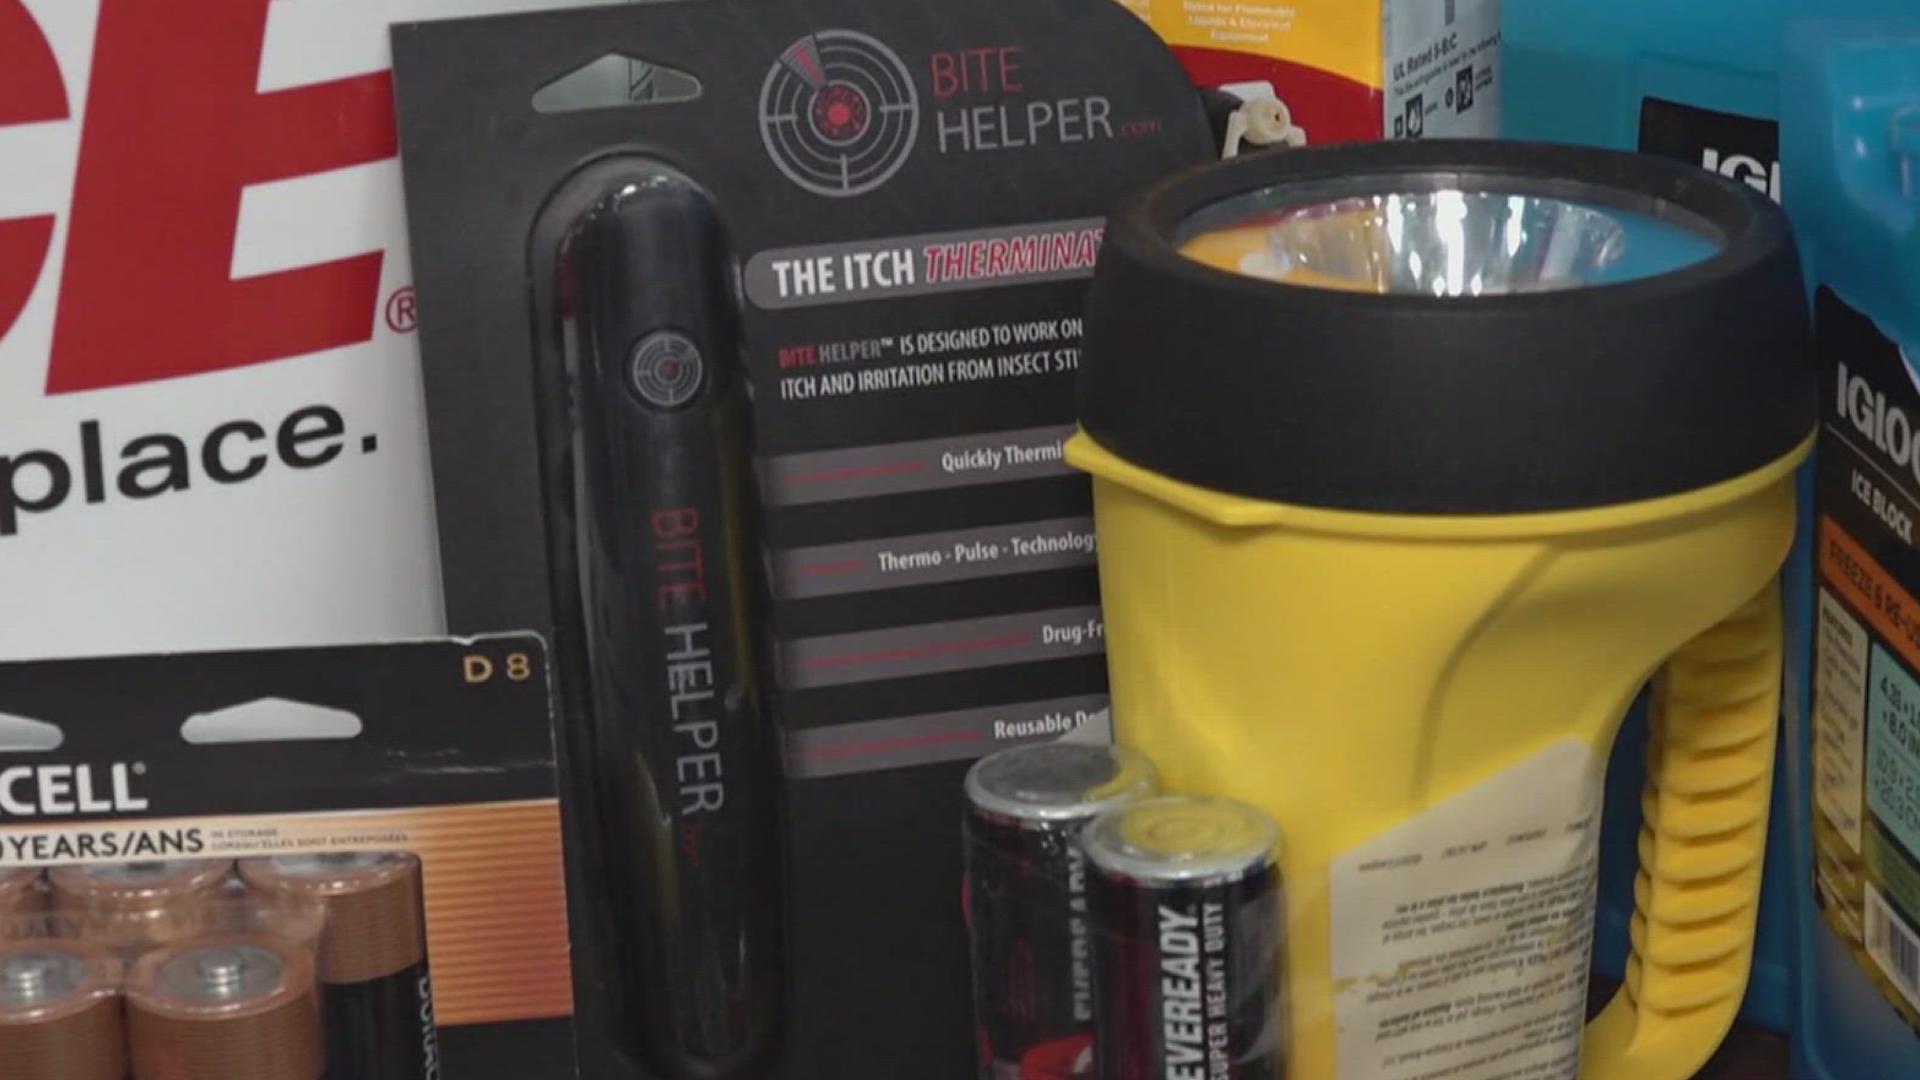 Now is the perfect time to build your hurricane season safety kit!